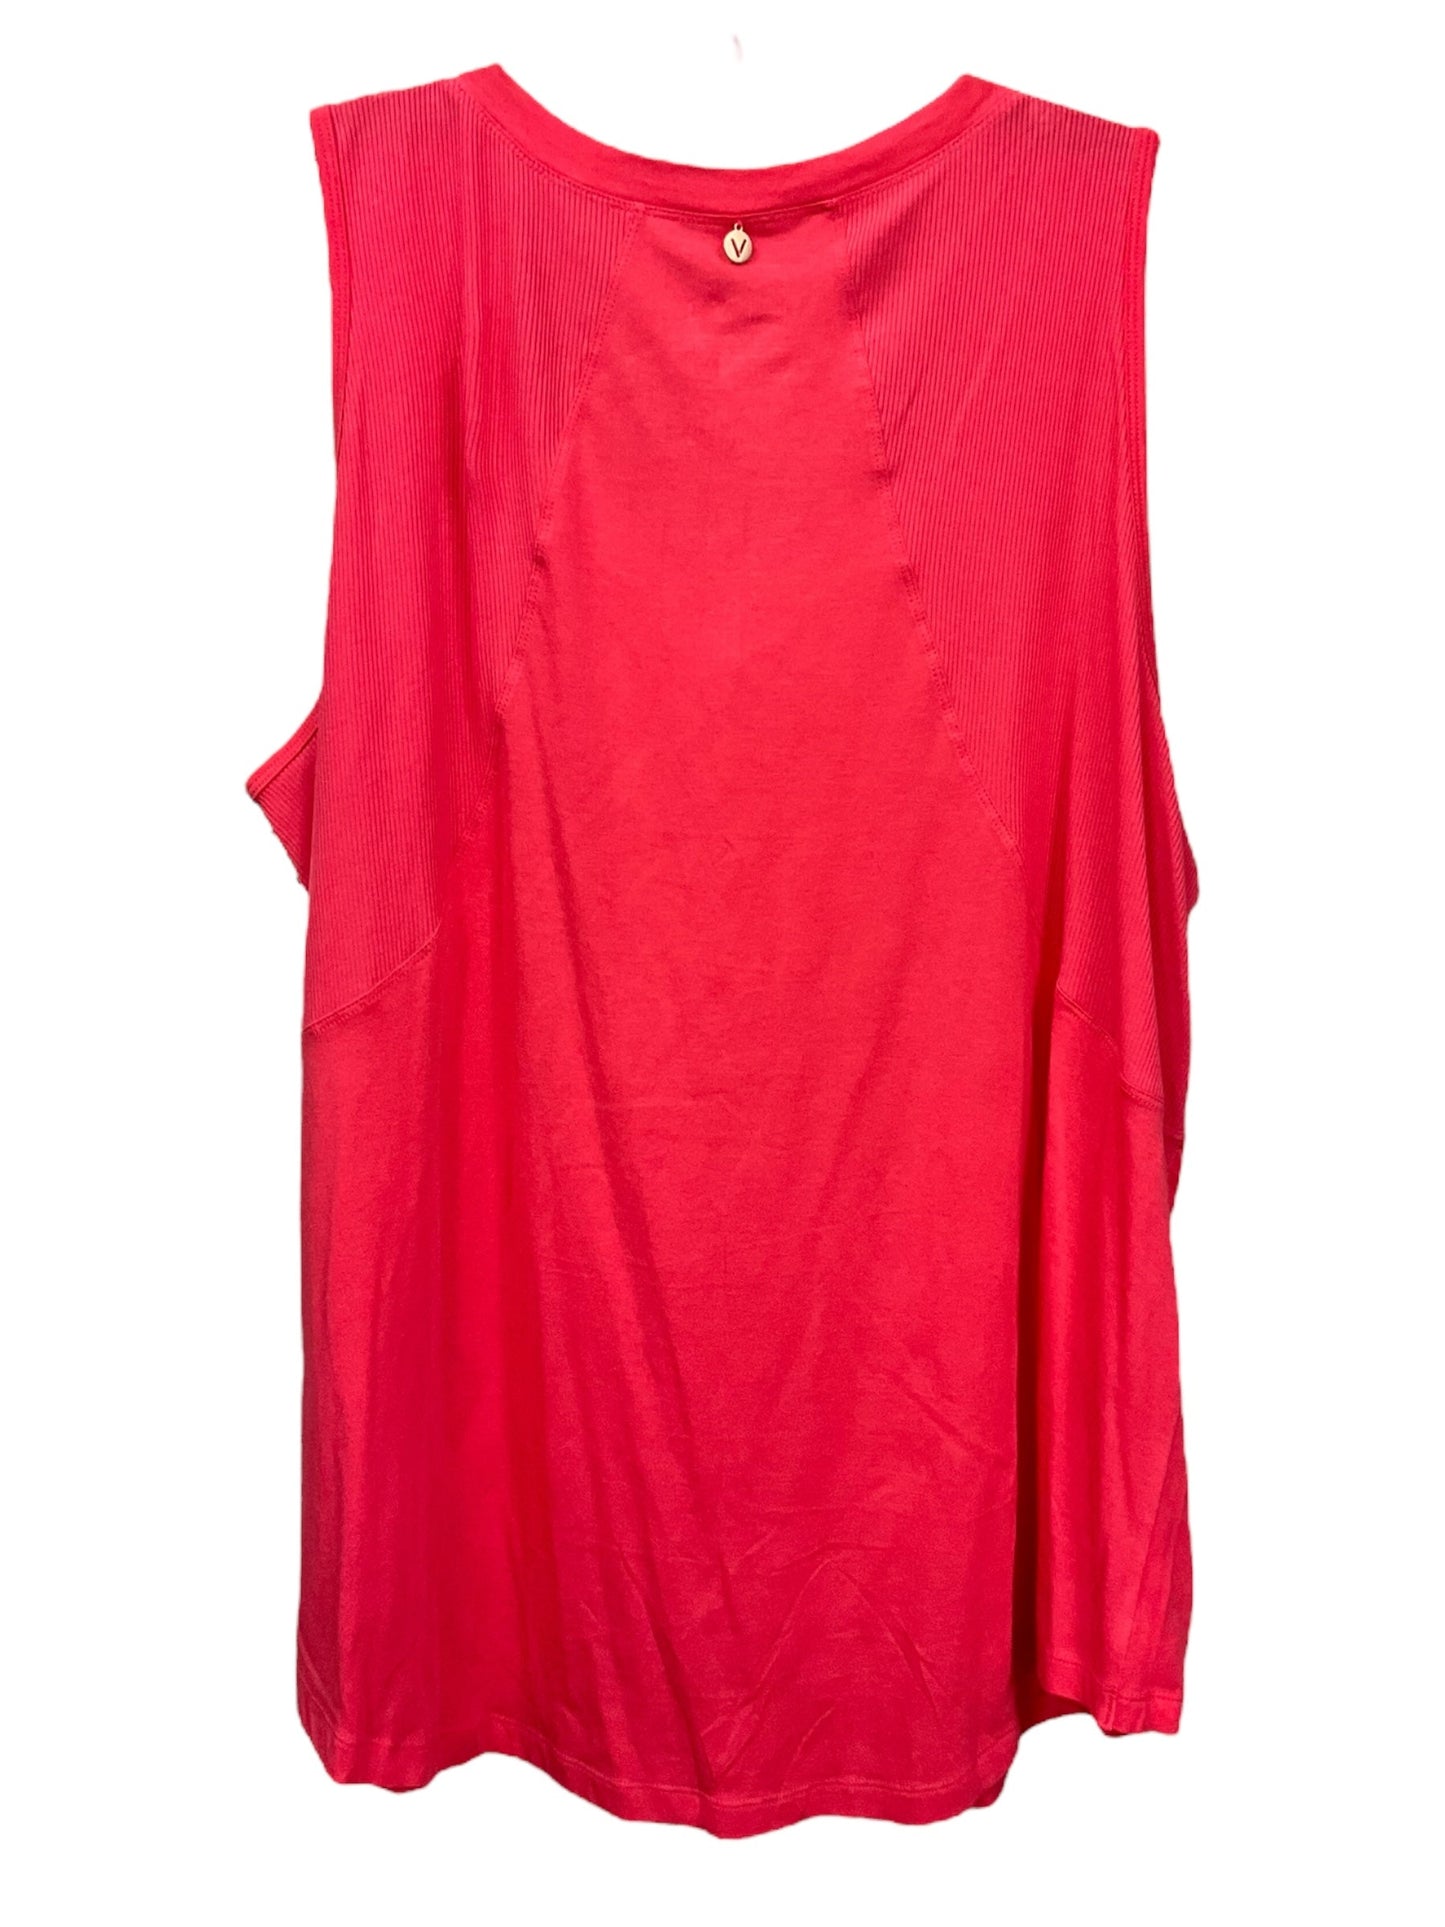 Coral Athletic Tank Top Livi Active, Size 2x